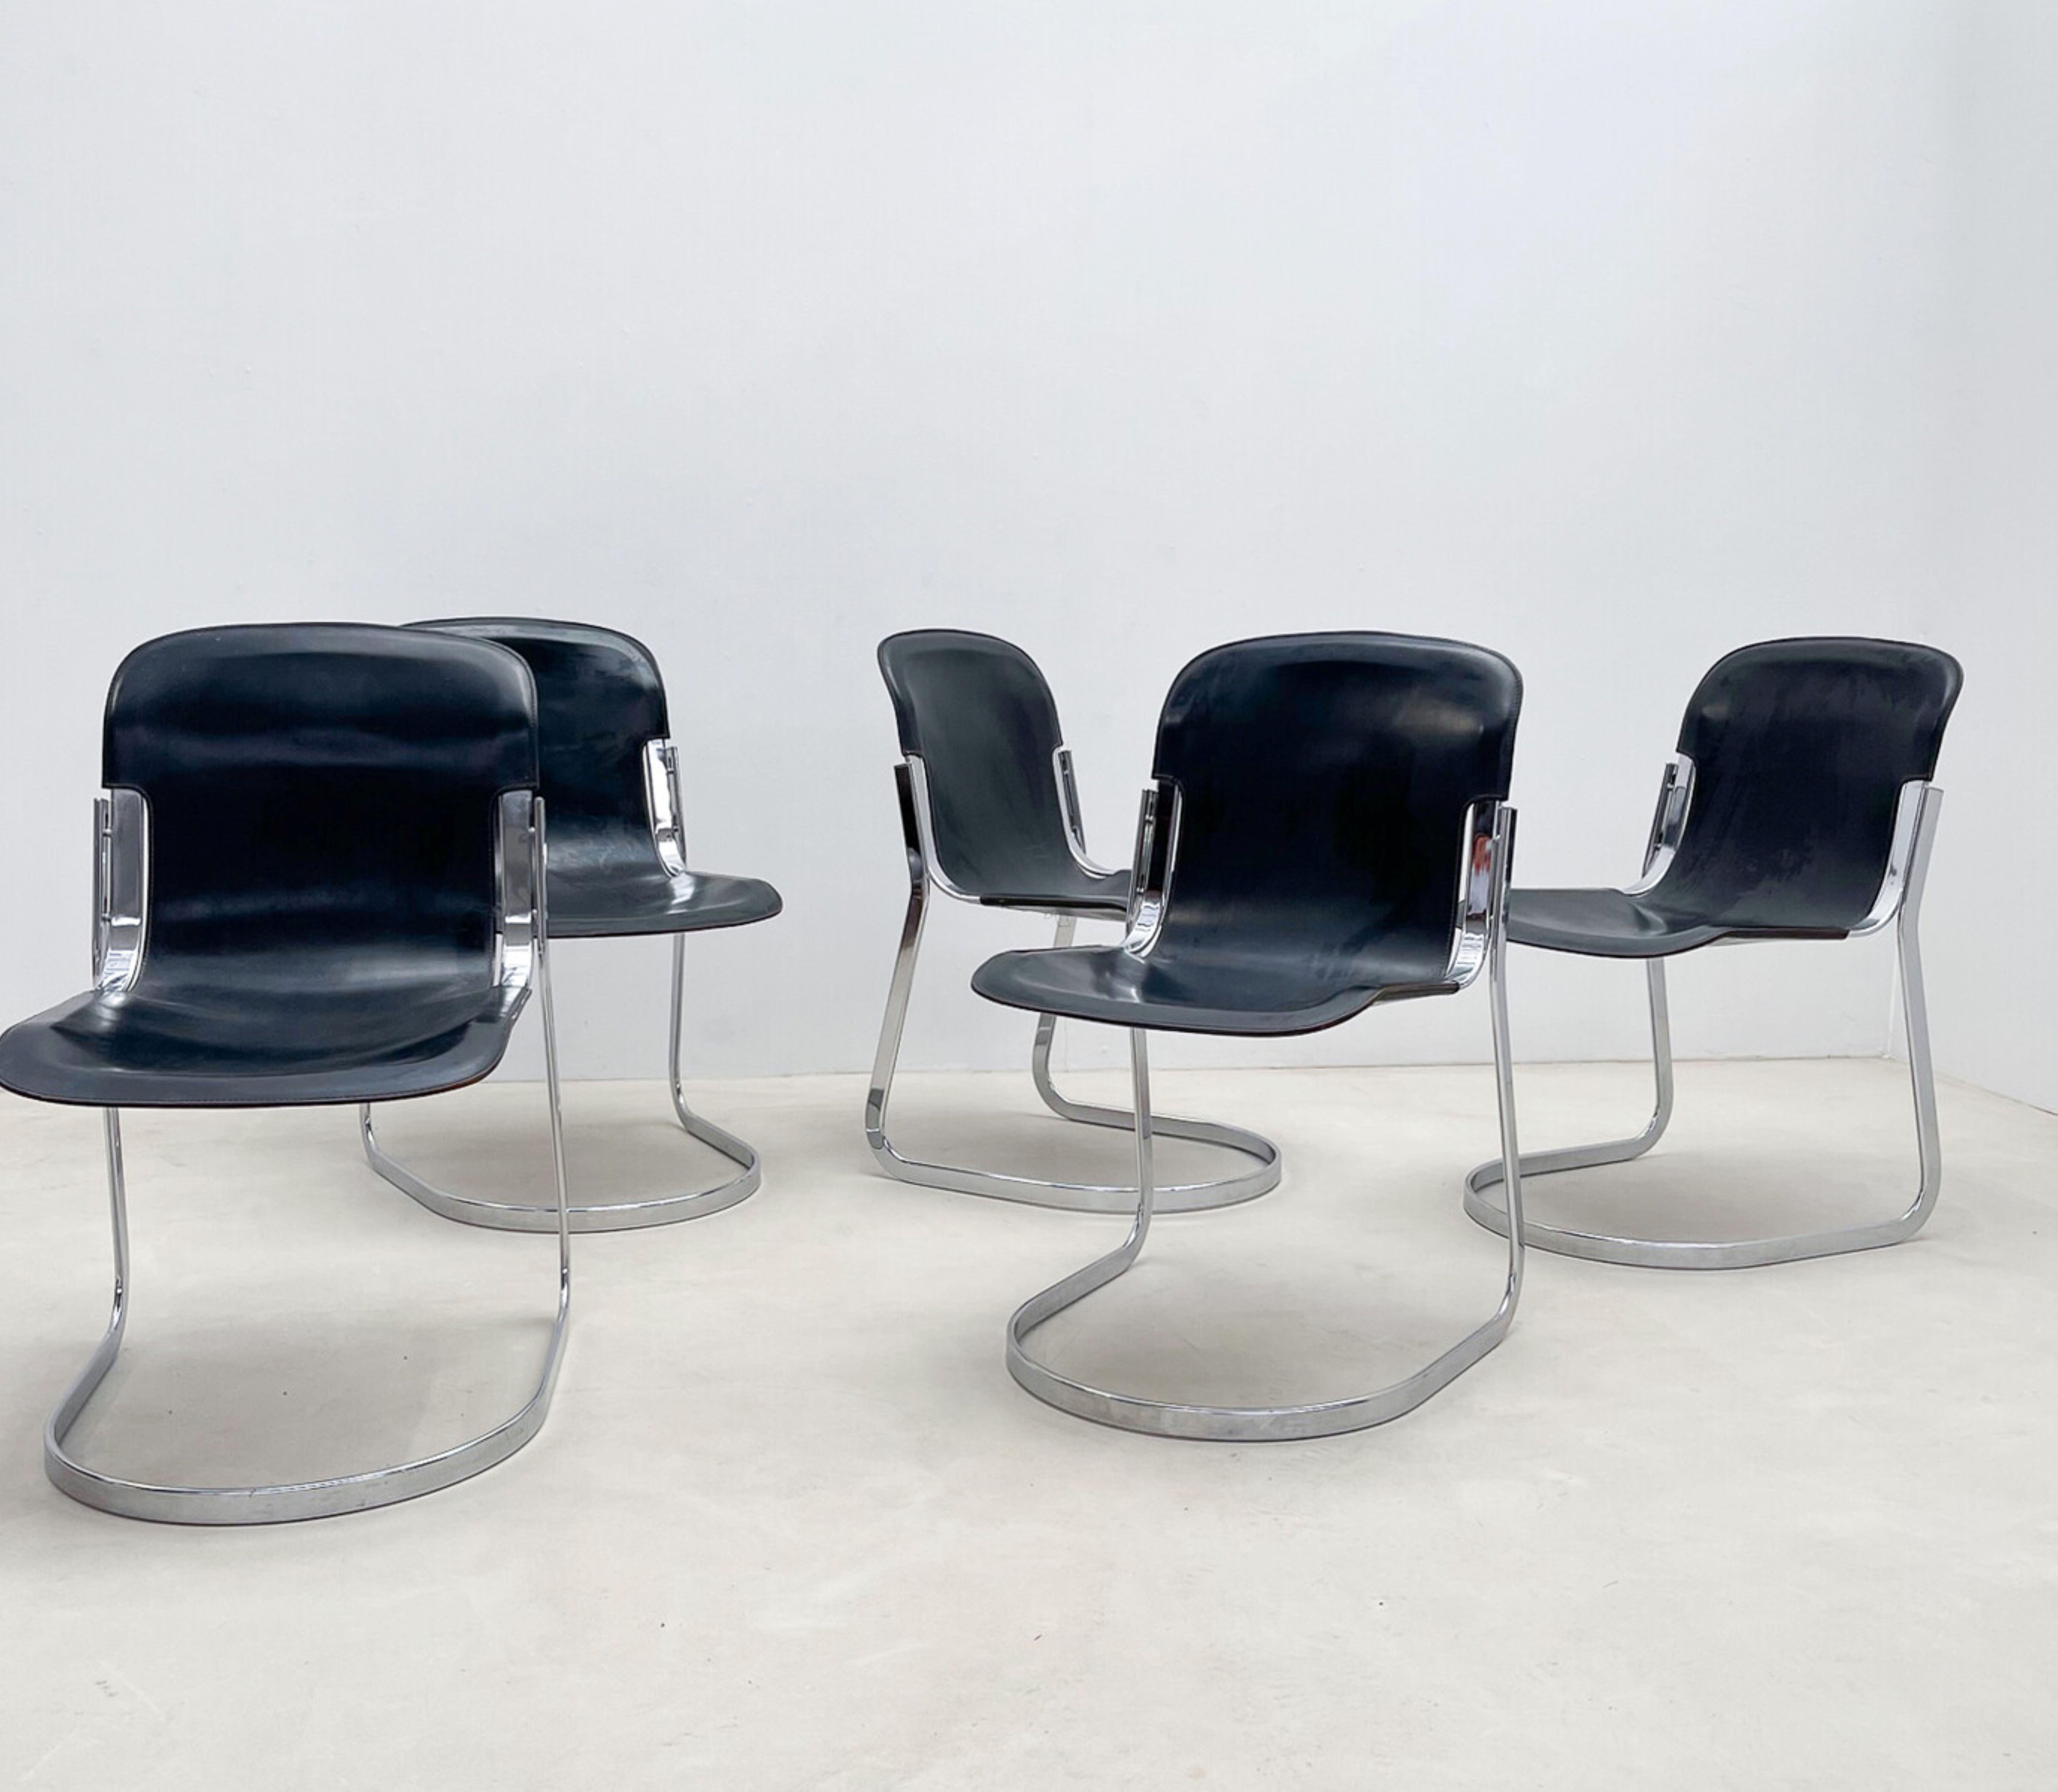 Late 20th Century Set of 5 Dining Chairs by Willy Rizzo for Cidue, Leather and Steel, Italy, 1970 For Sale